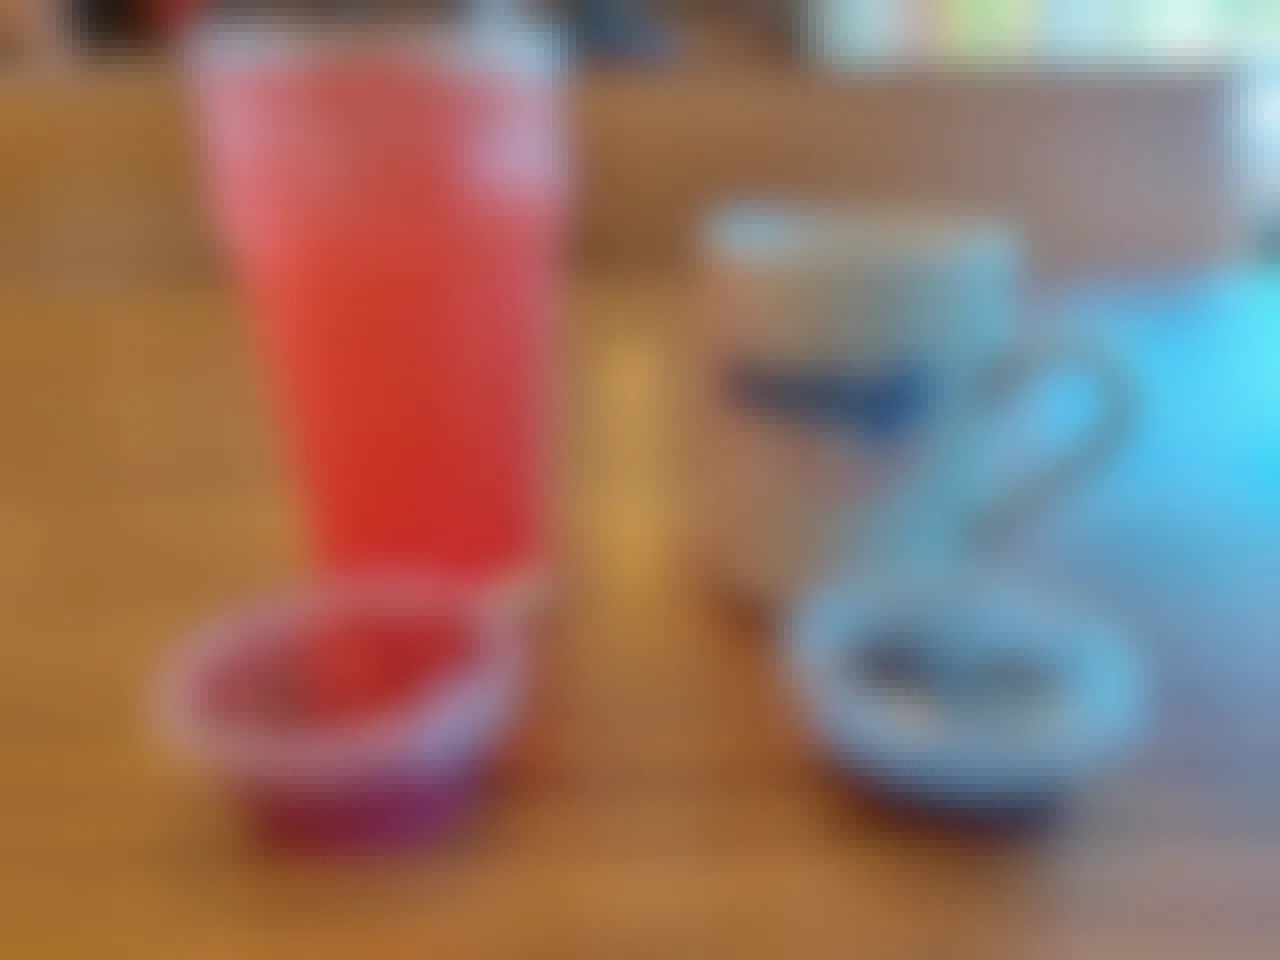 specialty" ihop drinks. free strawberry drink and maple syrup coffee.